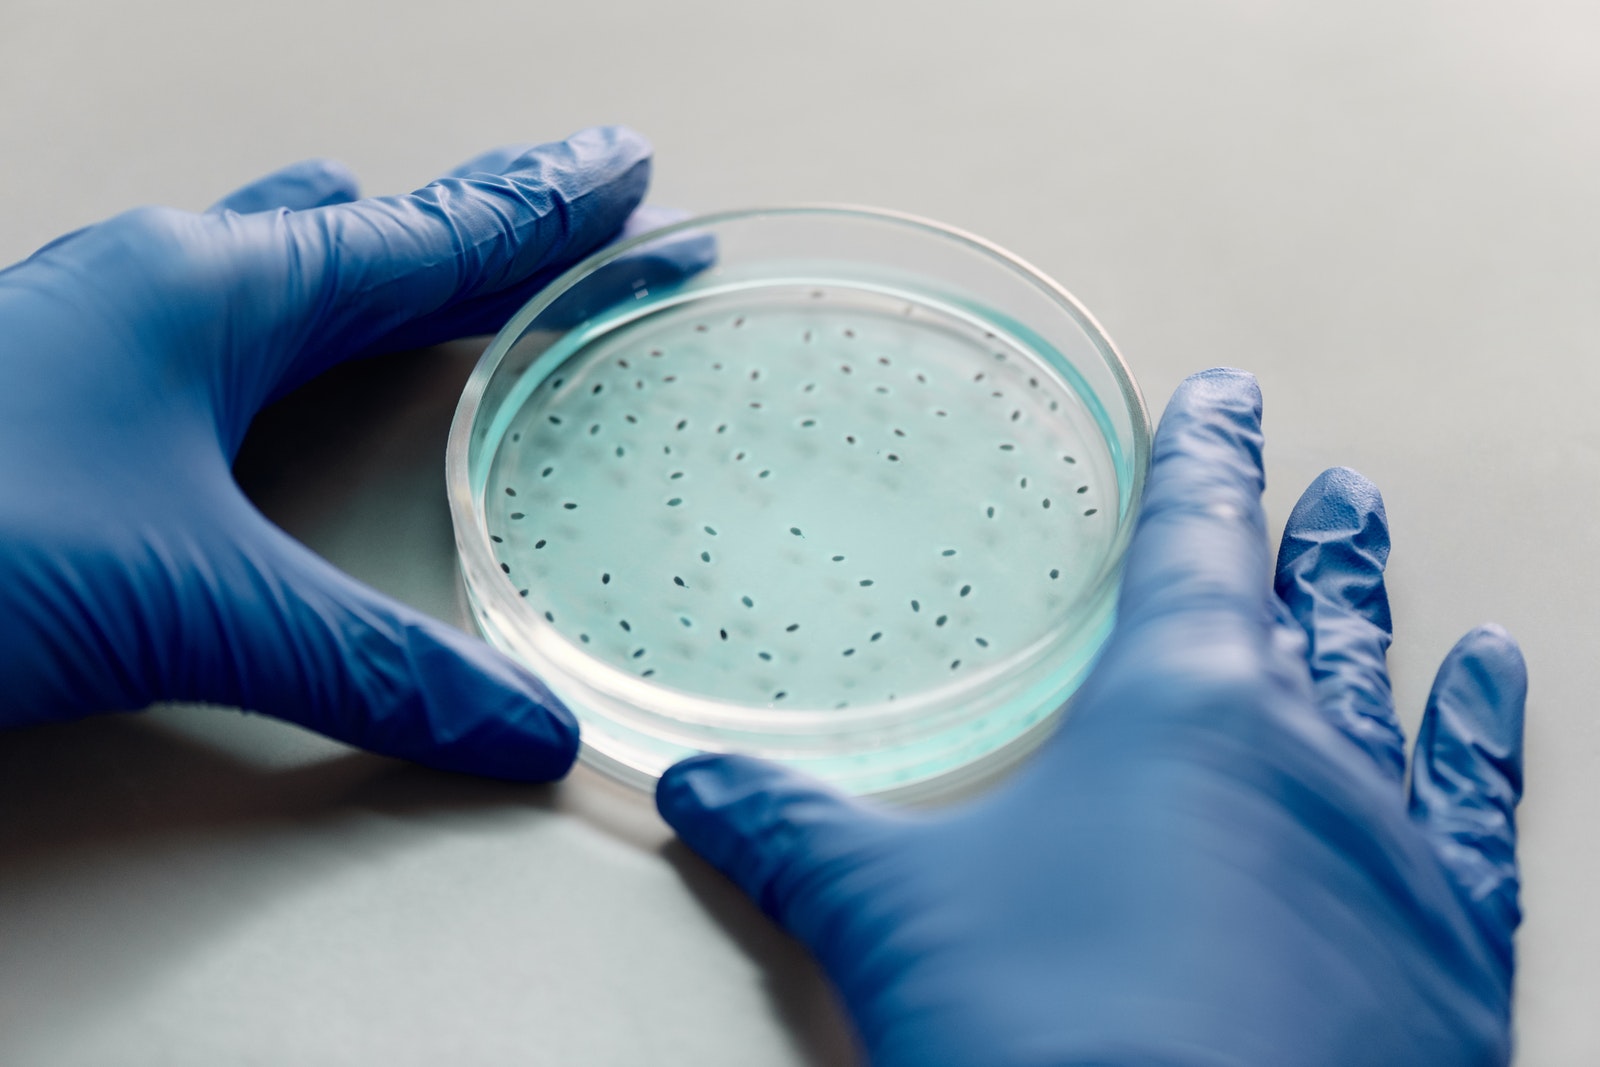 Photo of a Person with Blue Gloves Holding a Petri Dish